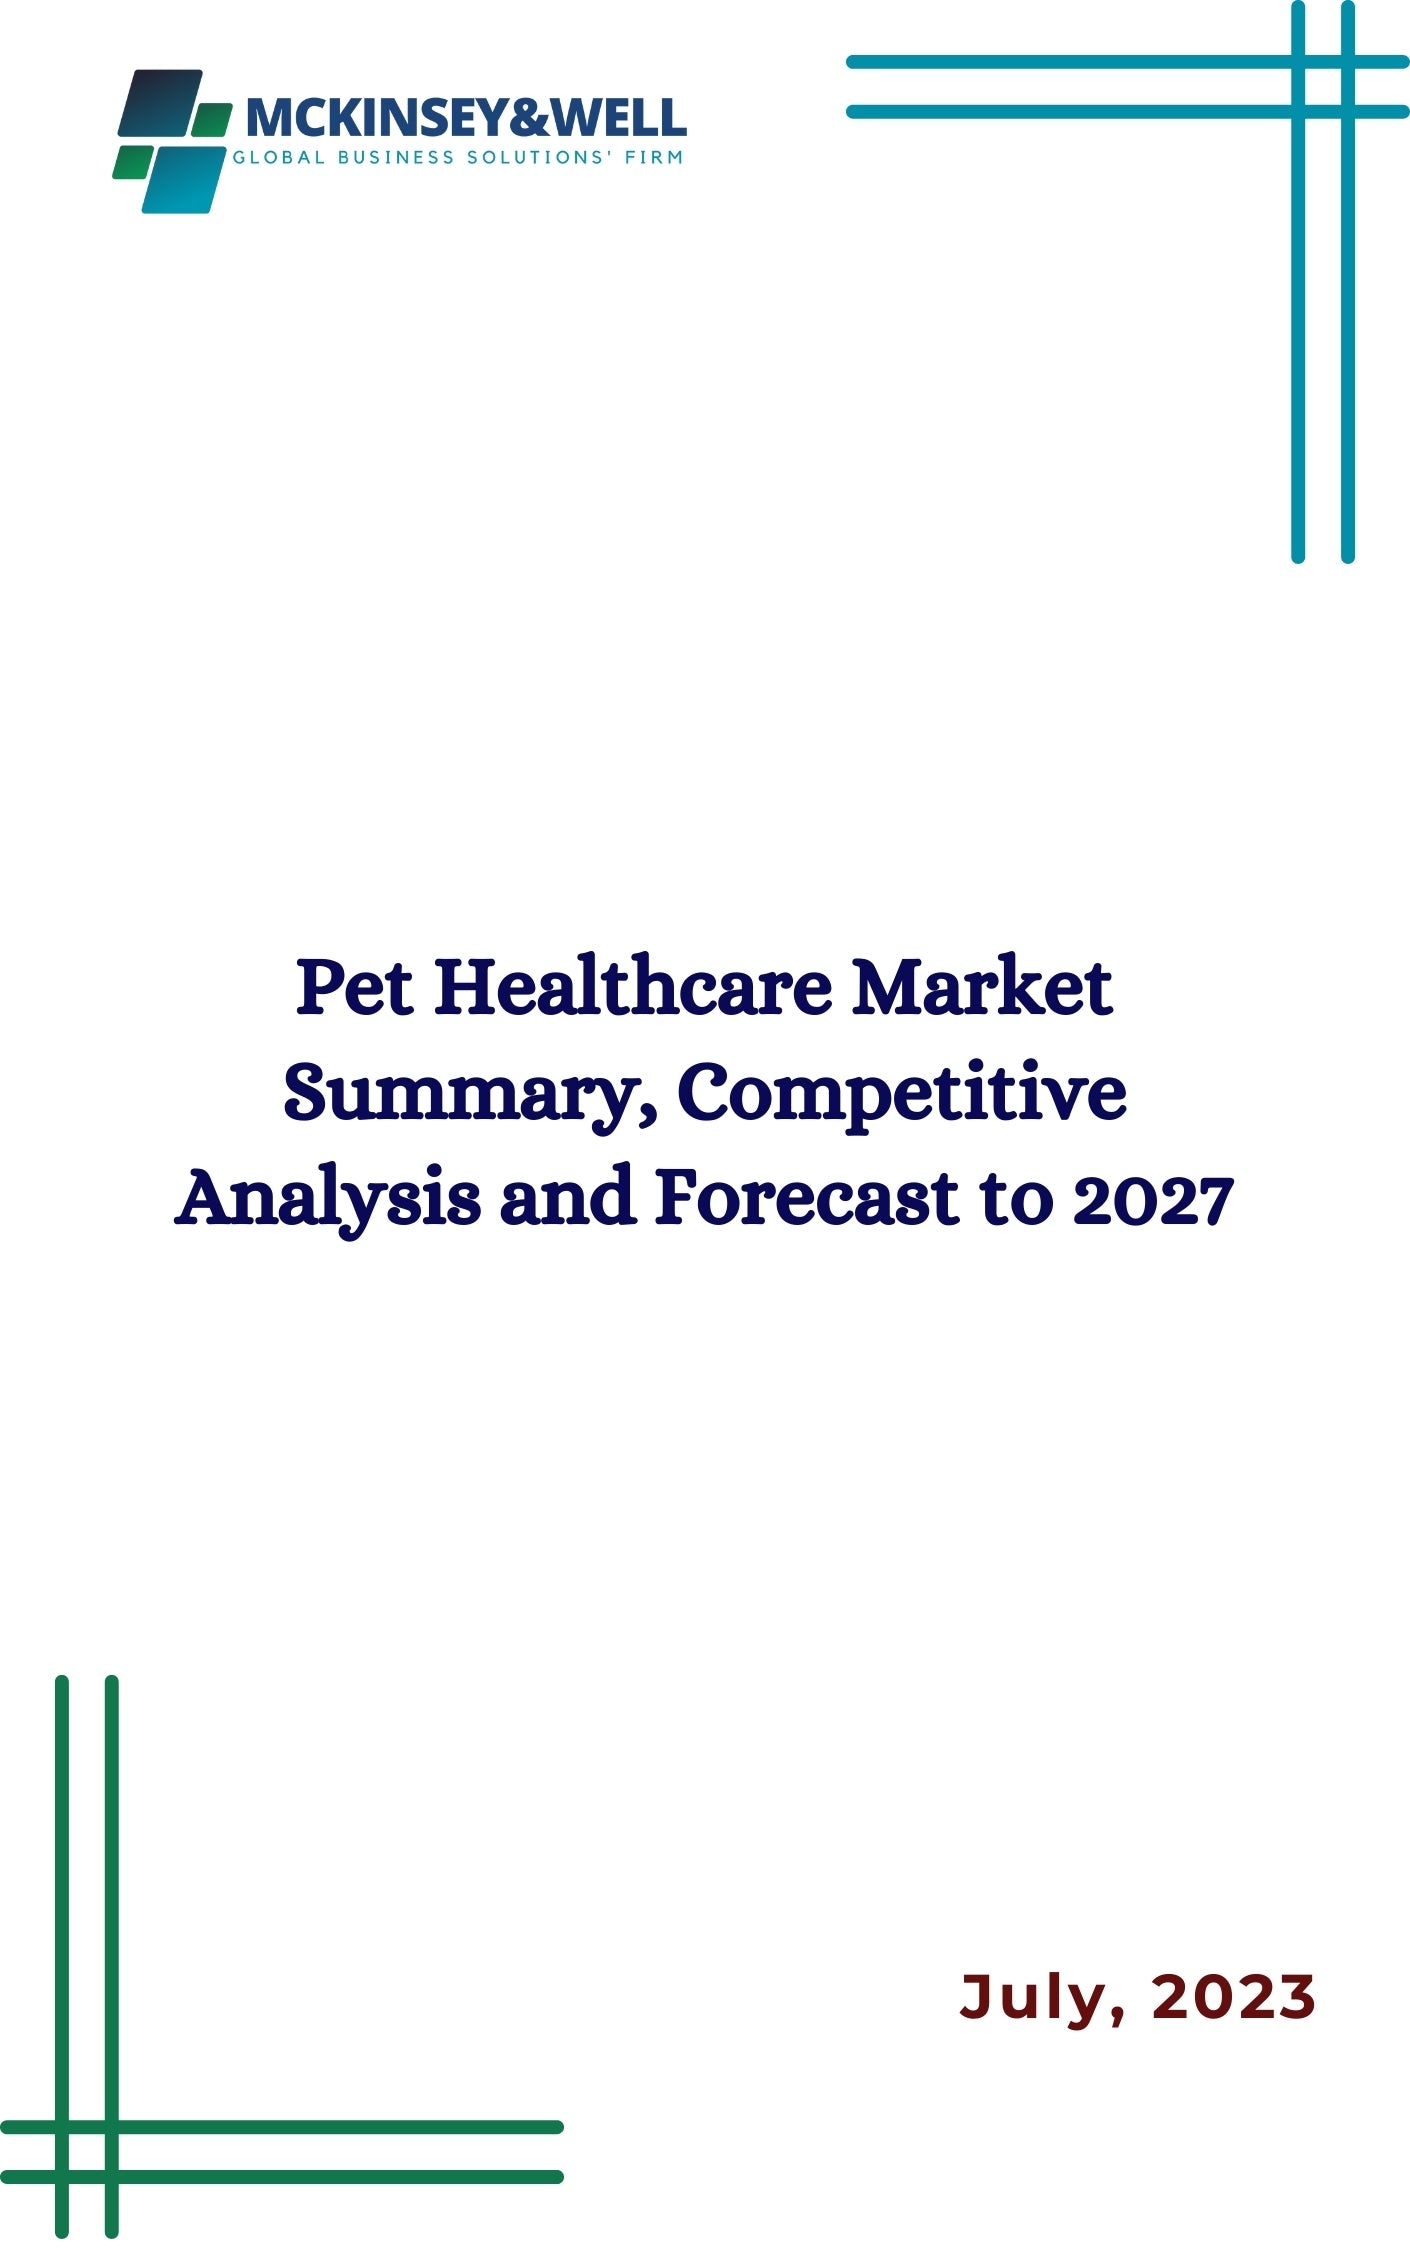 Pet Healthcare Market Summary, Competitive Analysis and Forecast to 2027